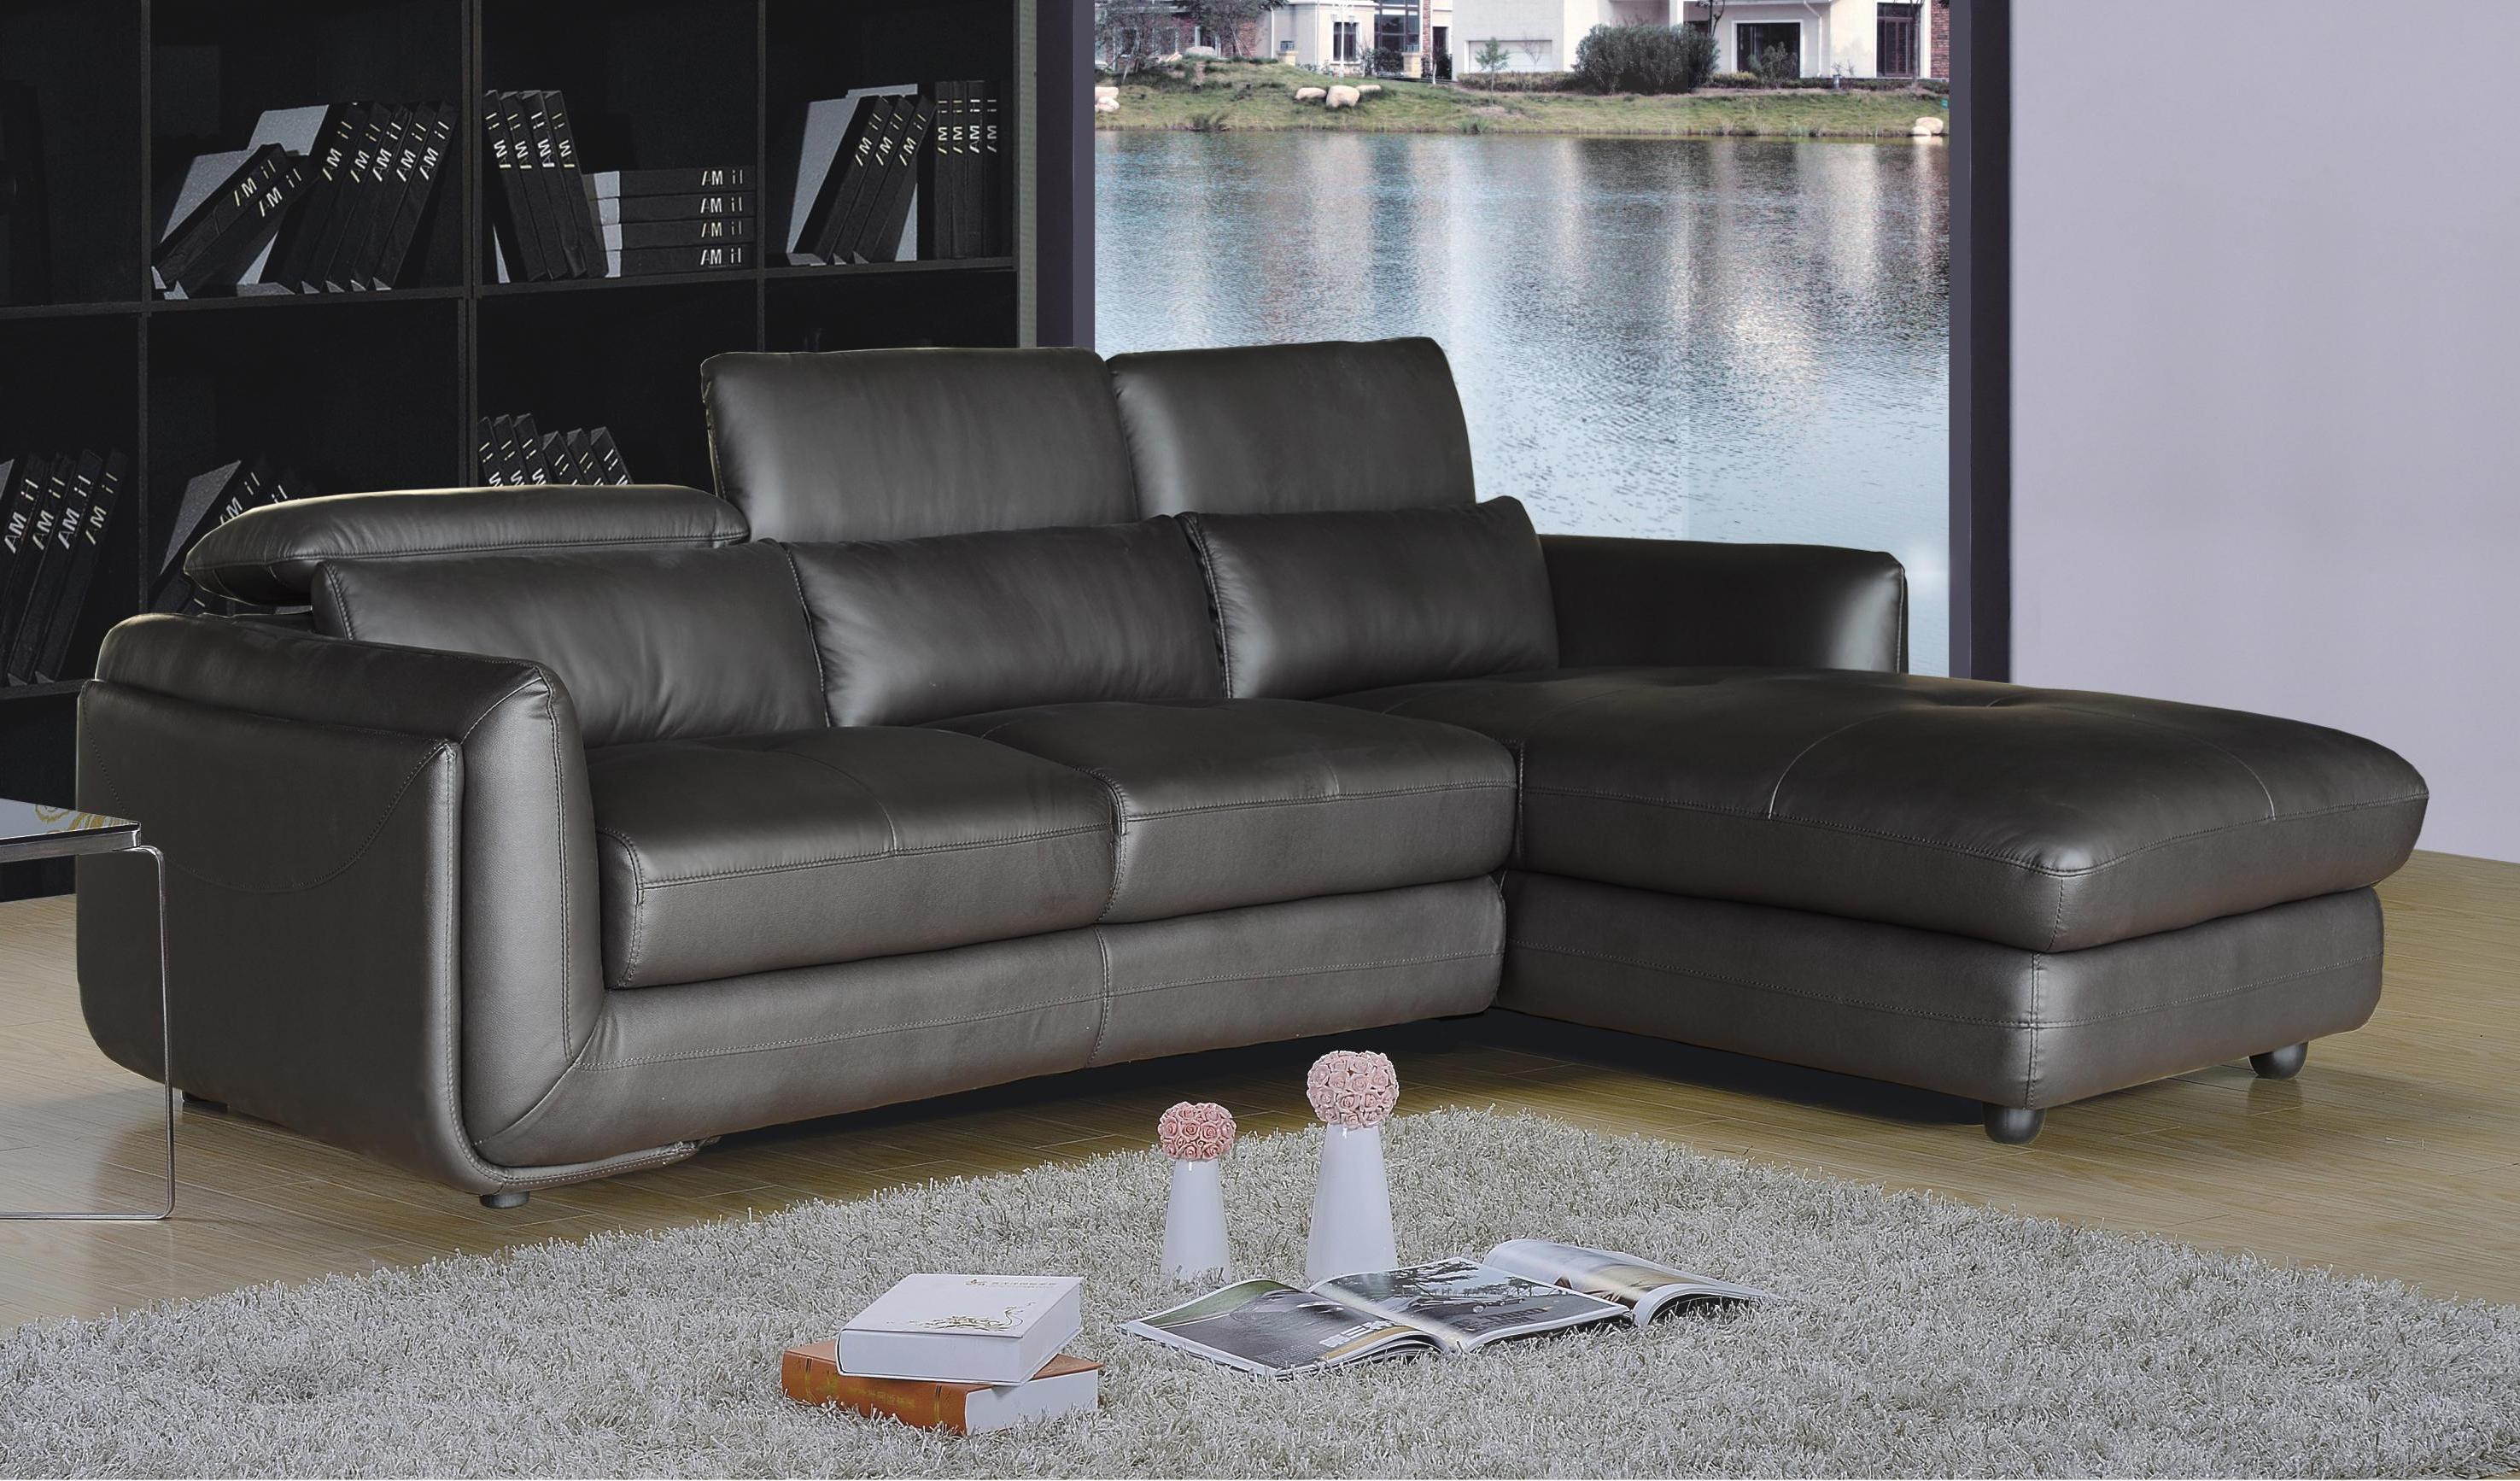 

    
AC Pacific Ron Grey Leather Match Sectional Sofa Right w/Adjustable Headrest
